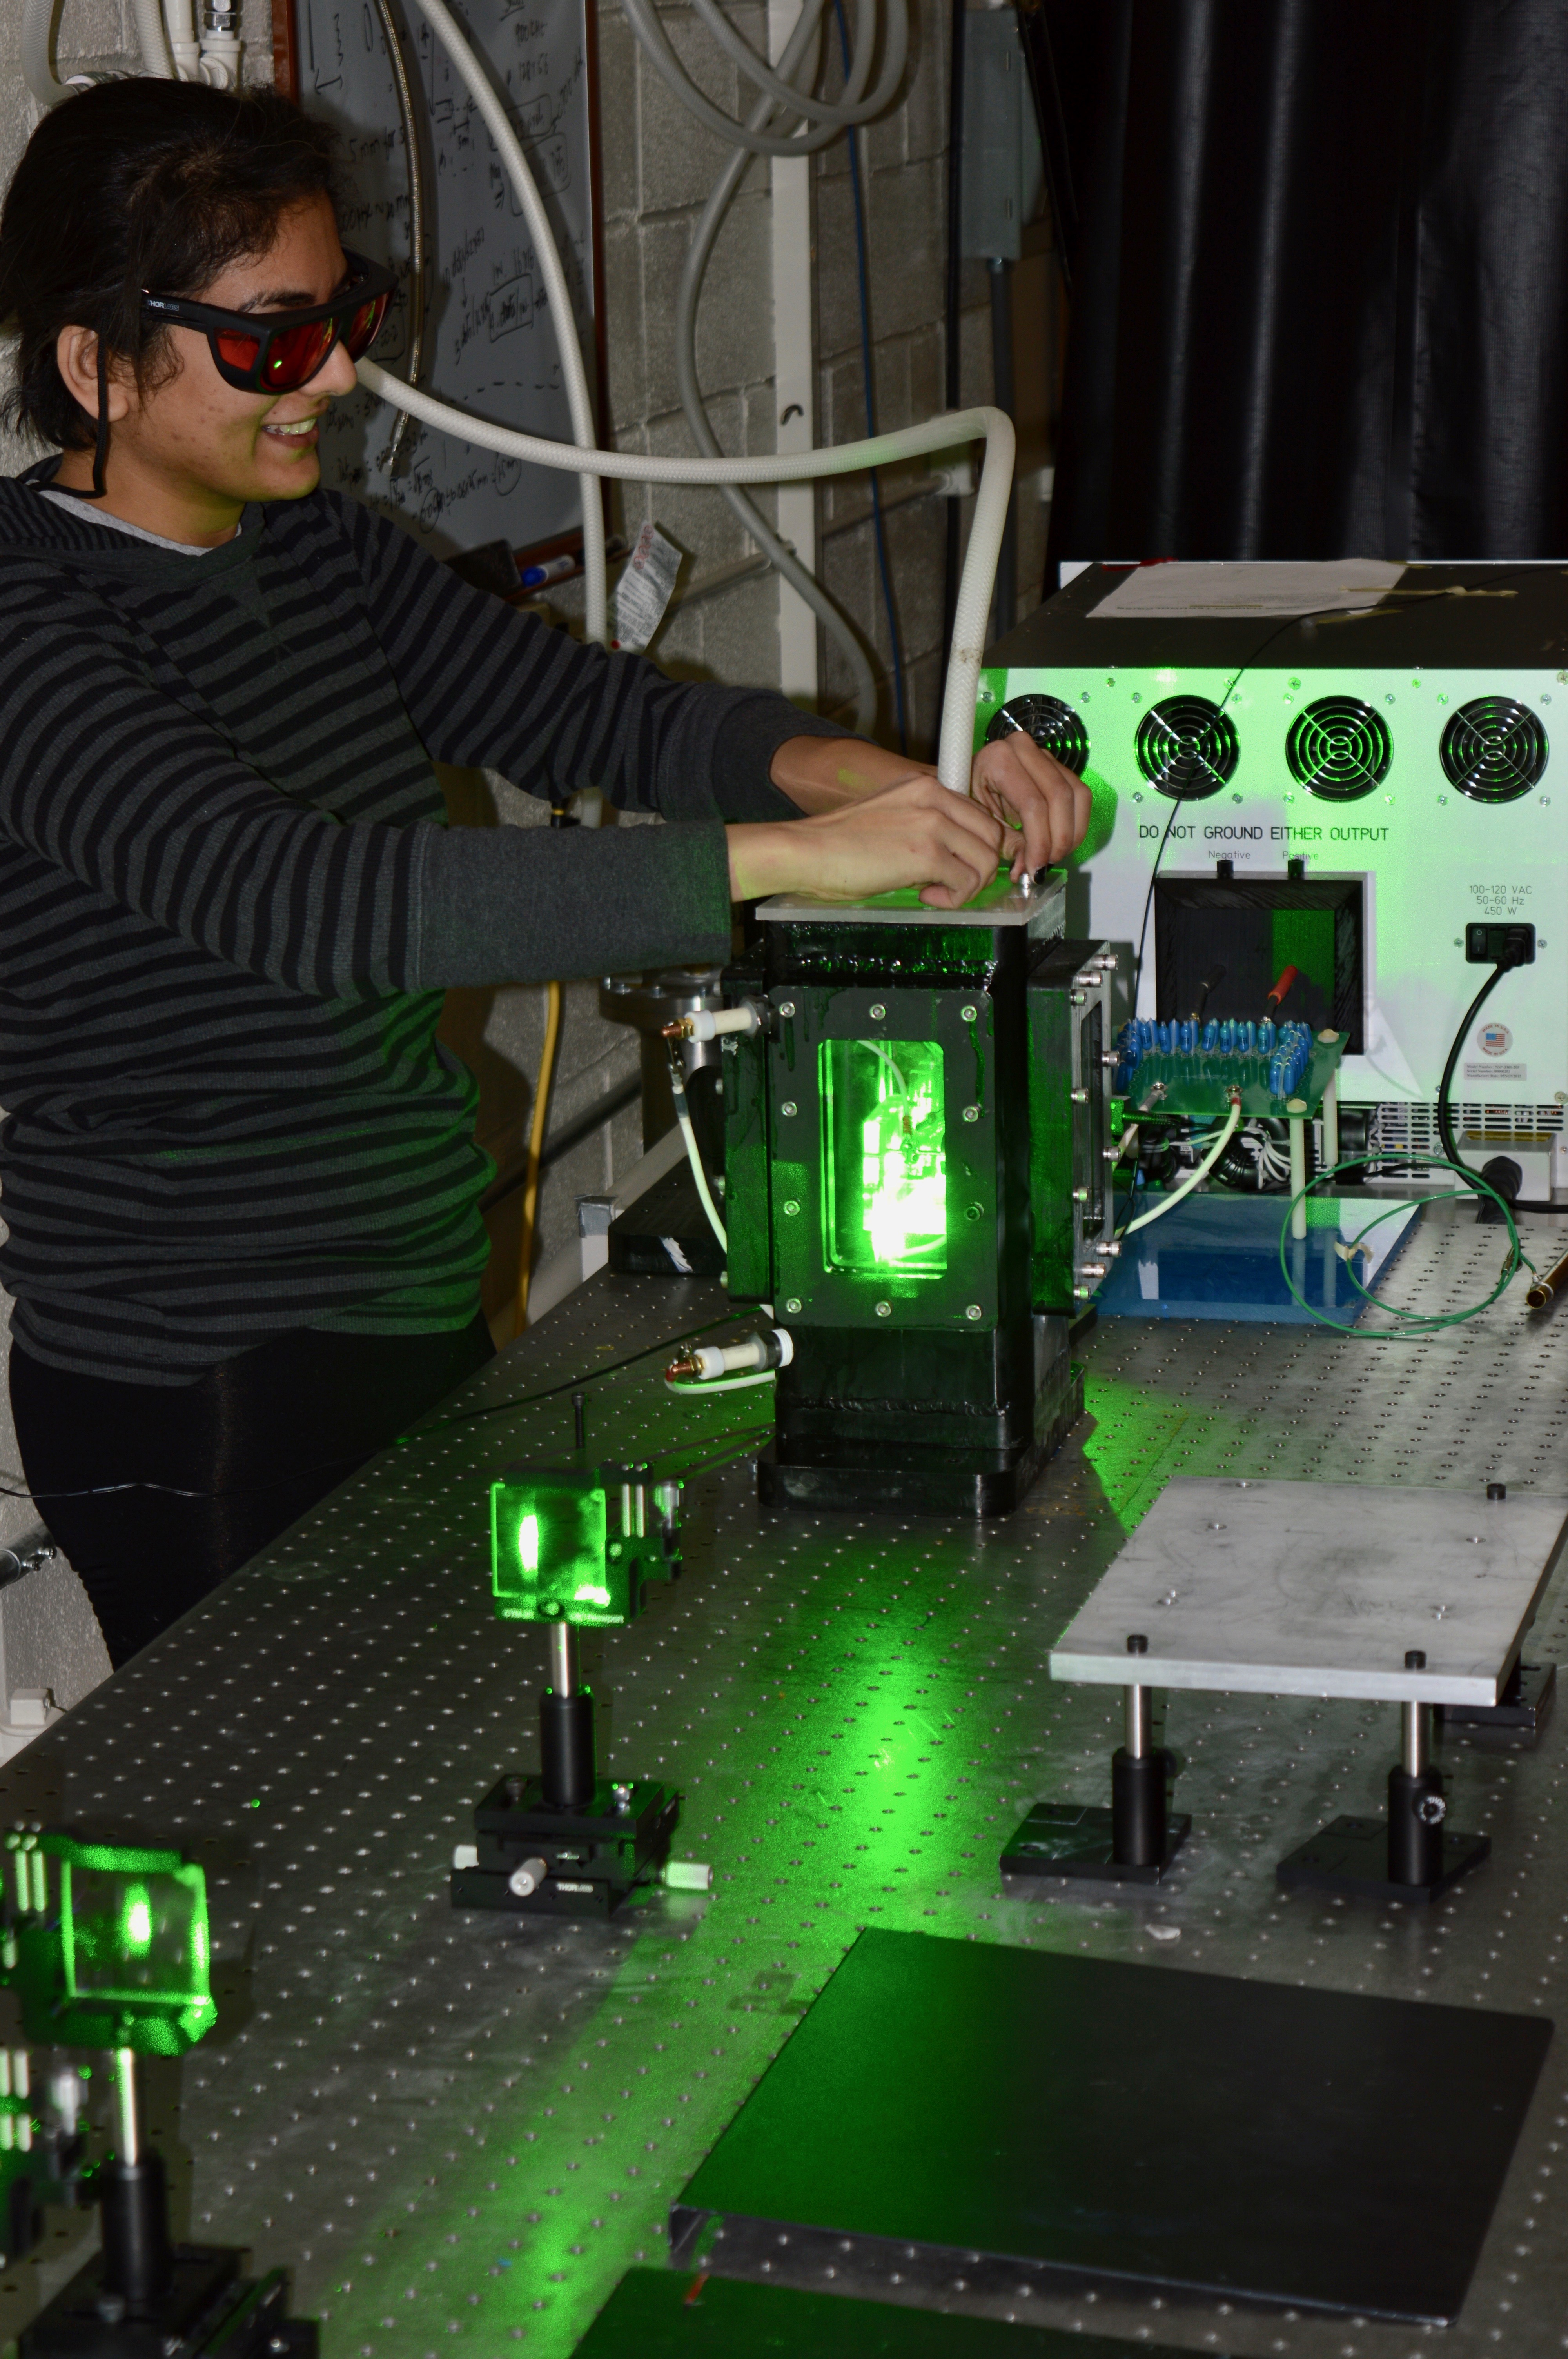 Bhavini Singh demonstrates particle image velocimetry for measuring the flow field induced by a plasma discharge.